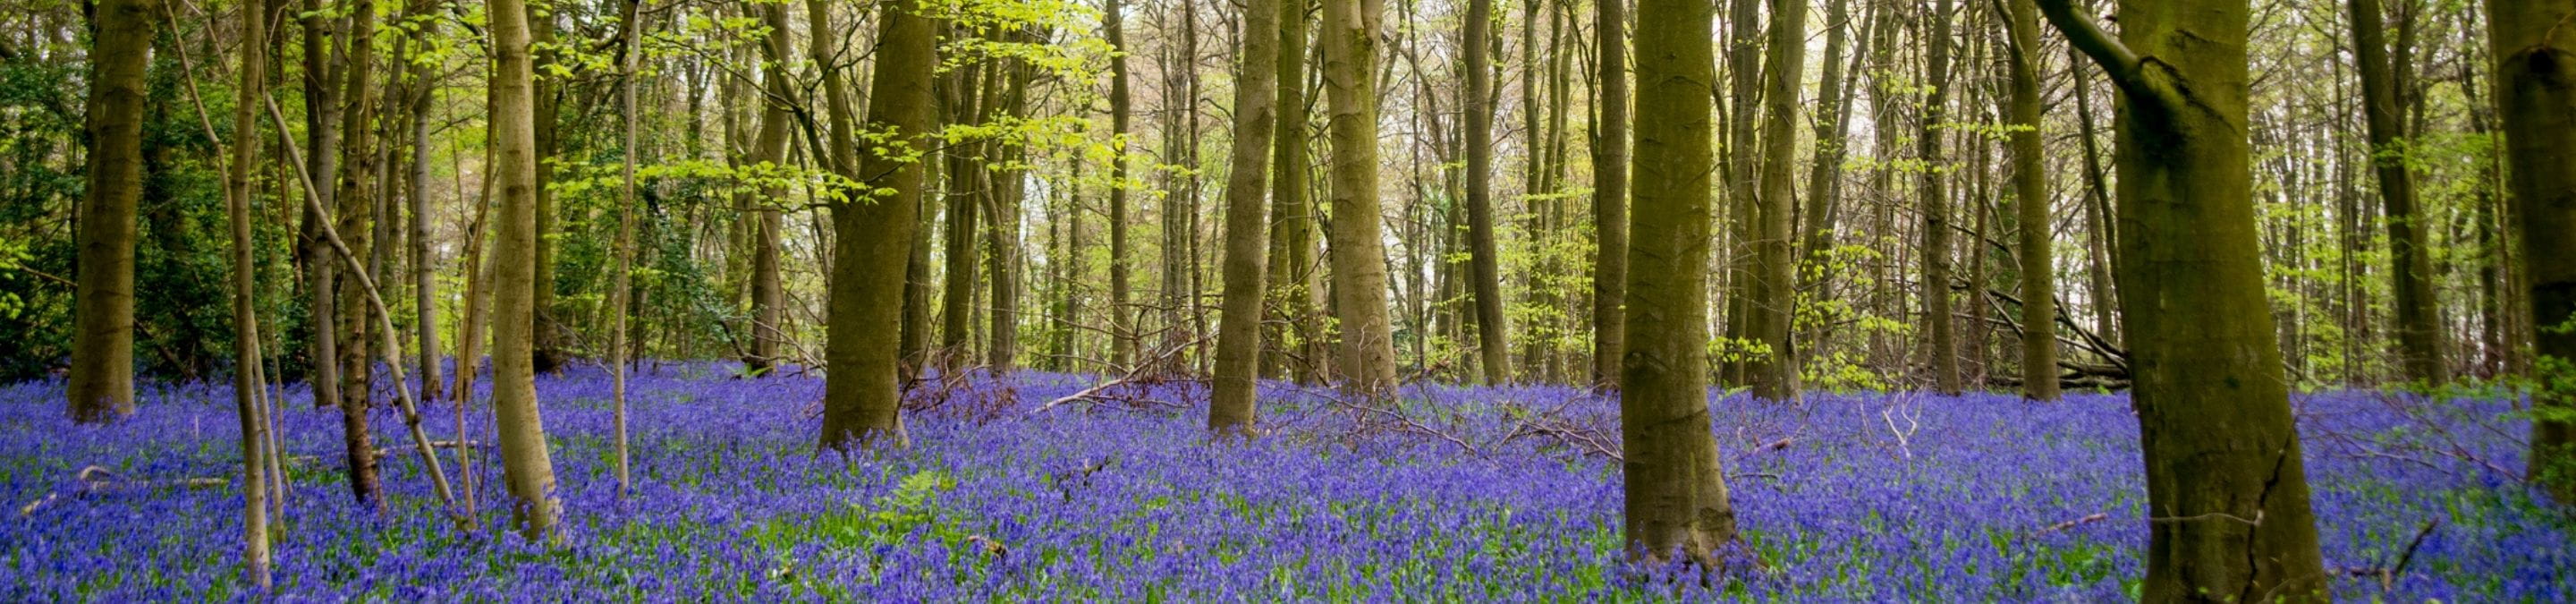 trees line a path in a forest covered in bluebells